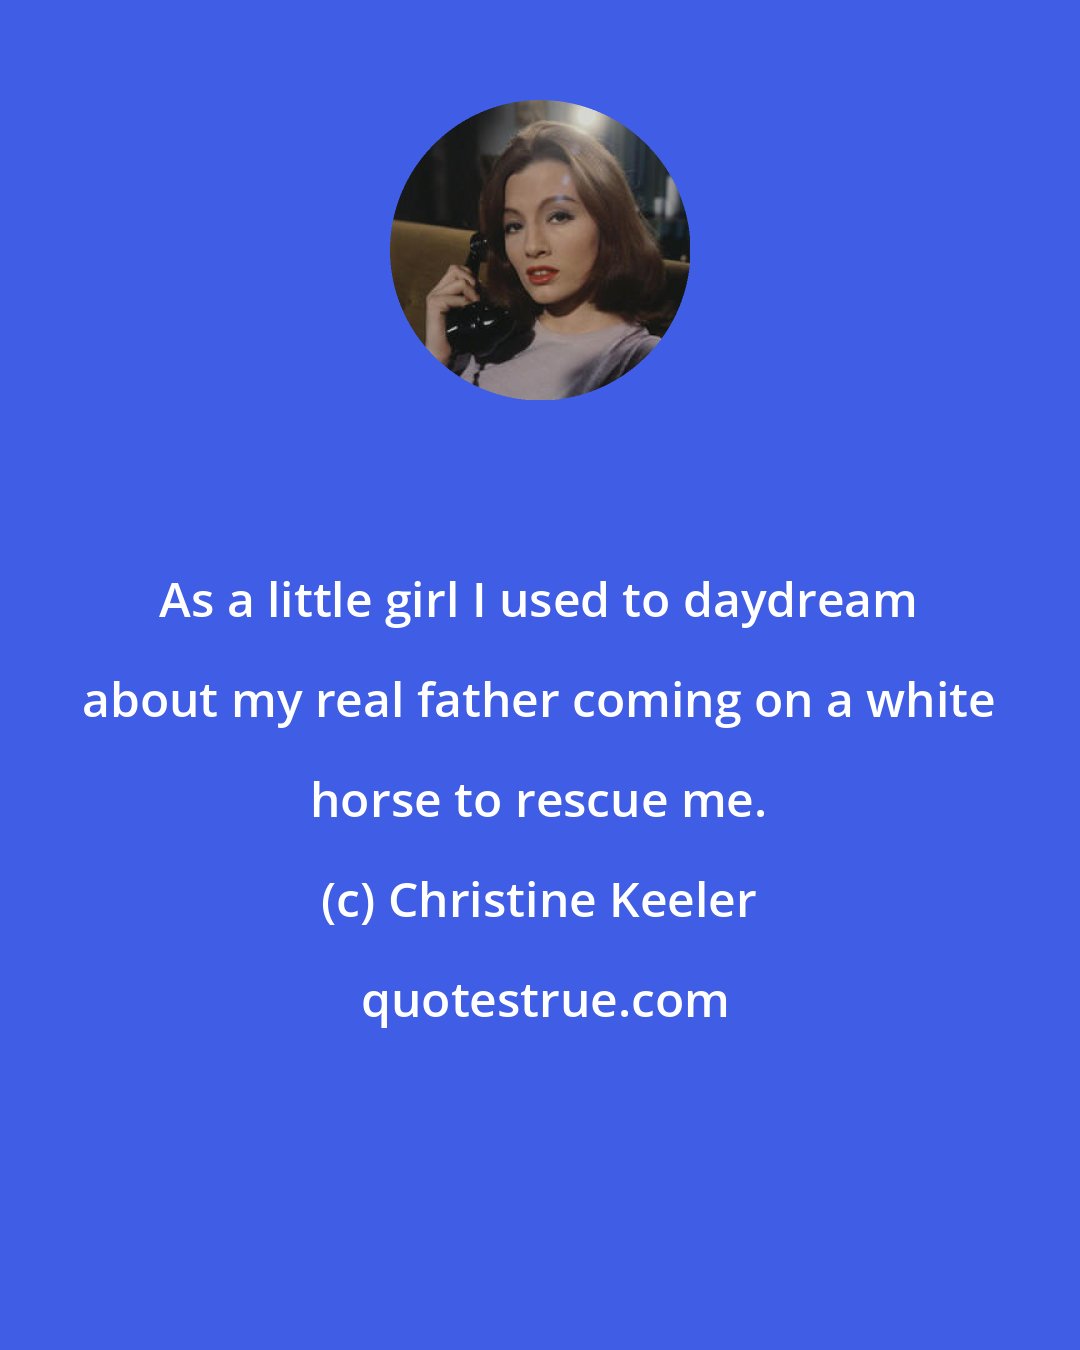 Christine Keeler: As a little girl I used to daydream about my real father coming on a white horse to rescue me.